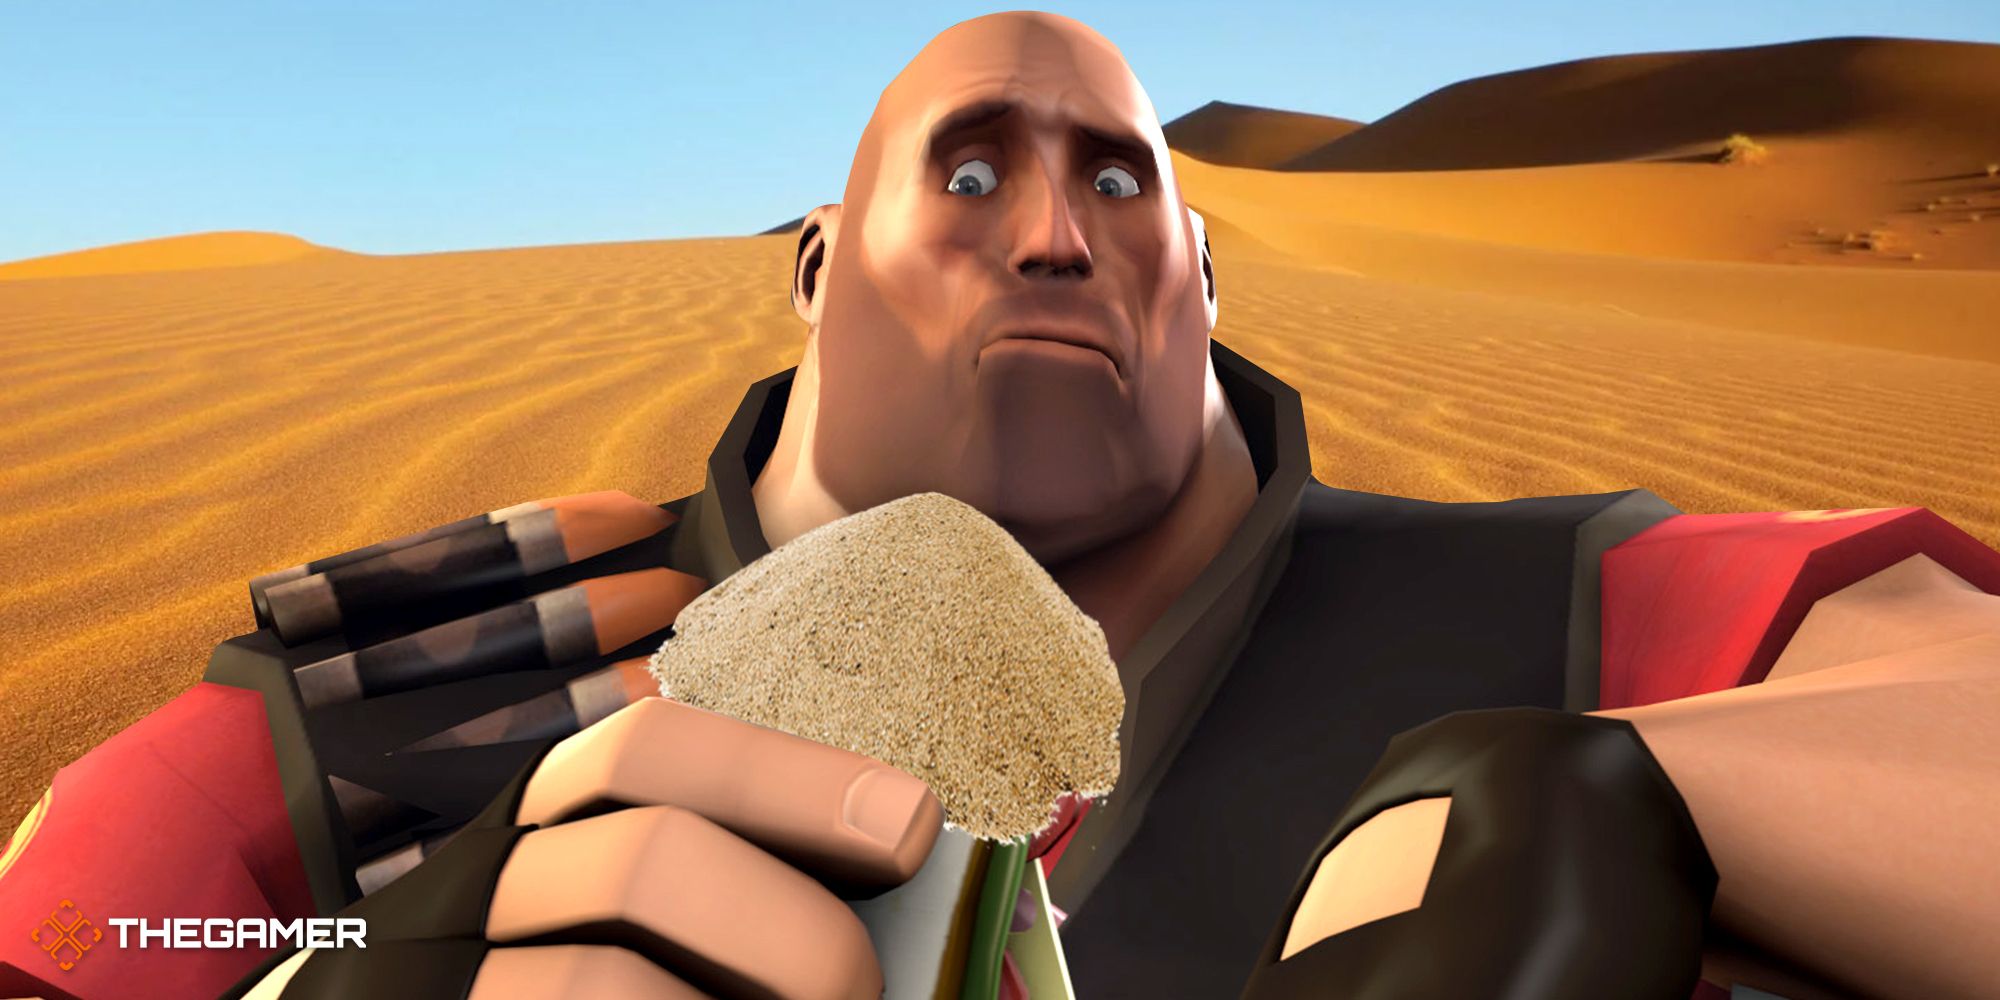 Team Fortress 2 Is So Dry, Fans Are Obsessing Over Sand